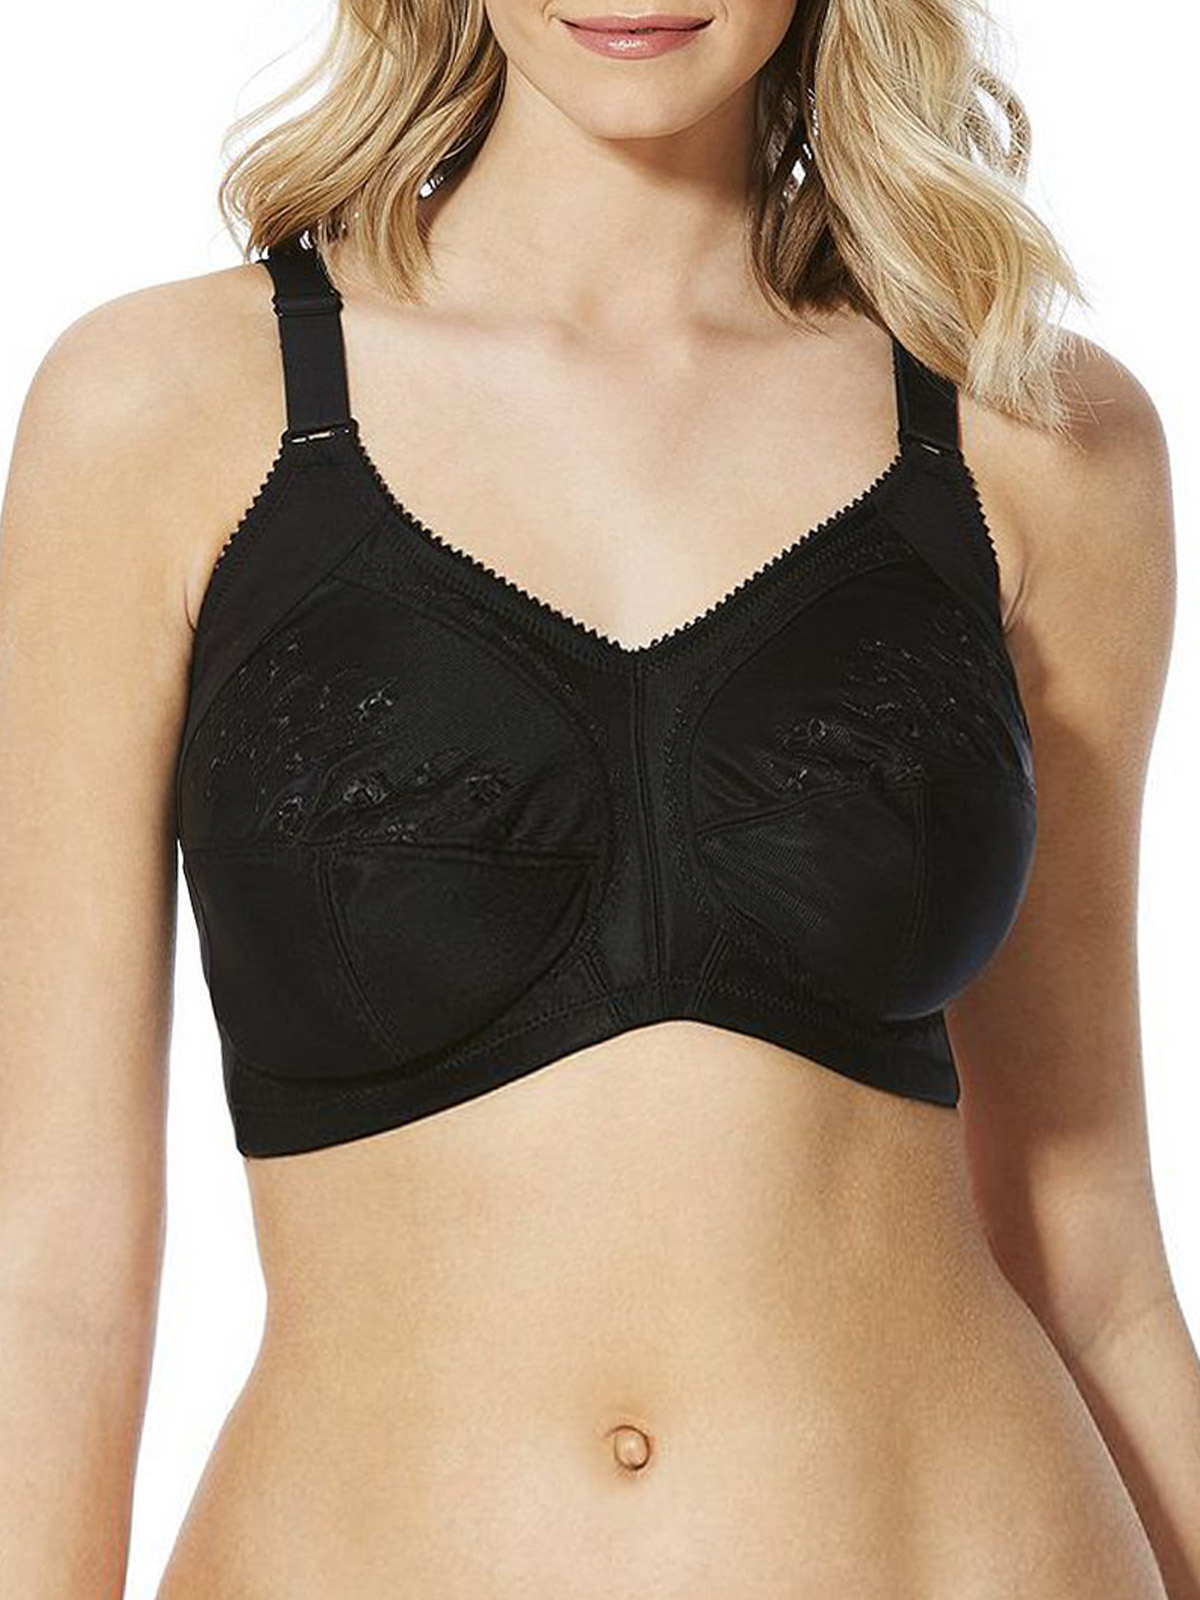 F&F - - F&F BLACK Embroidered Total Support Full Cup Bra - Size 34